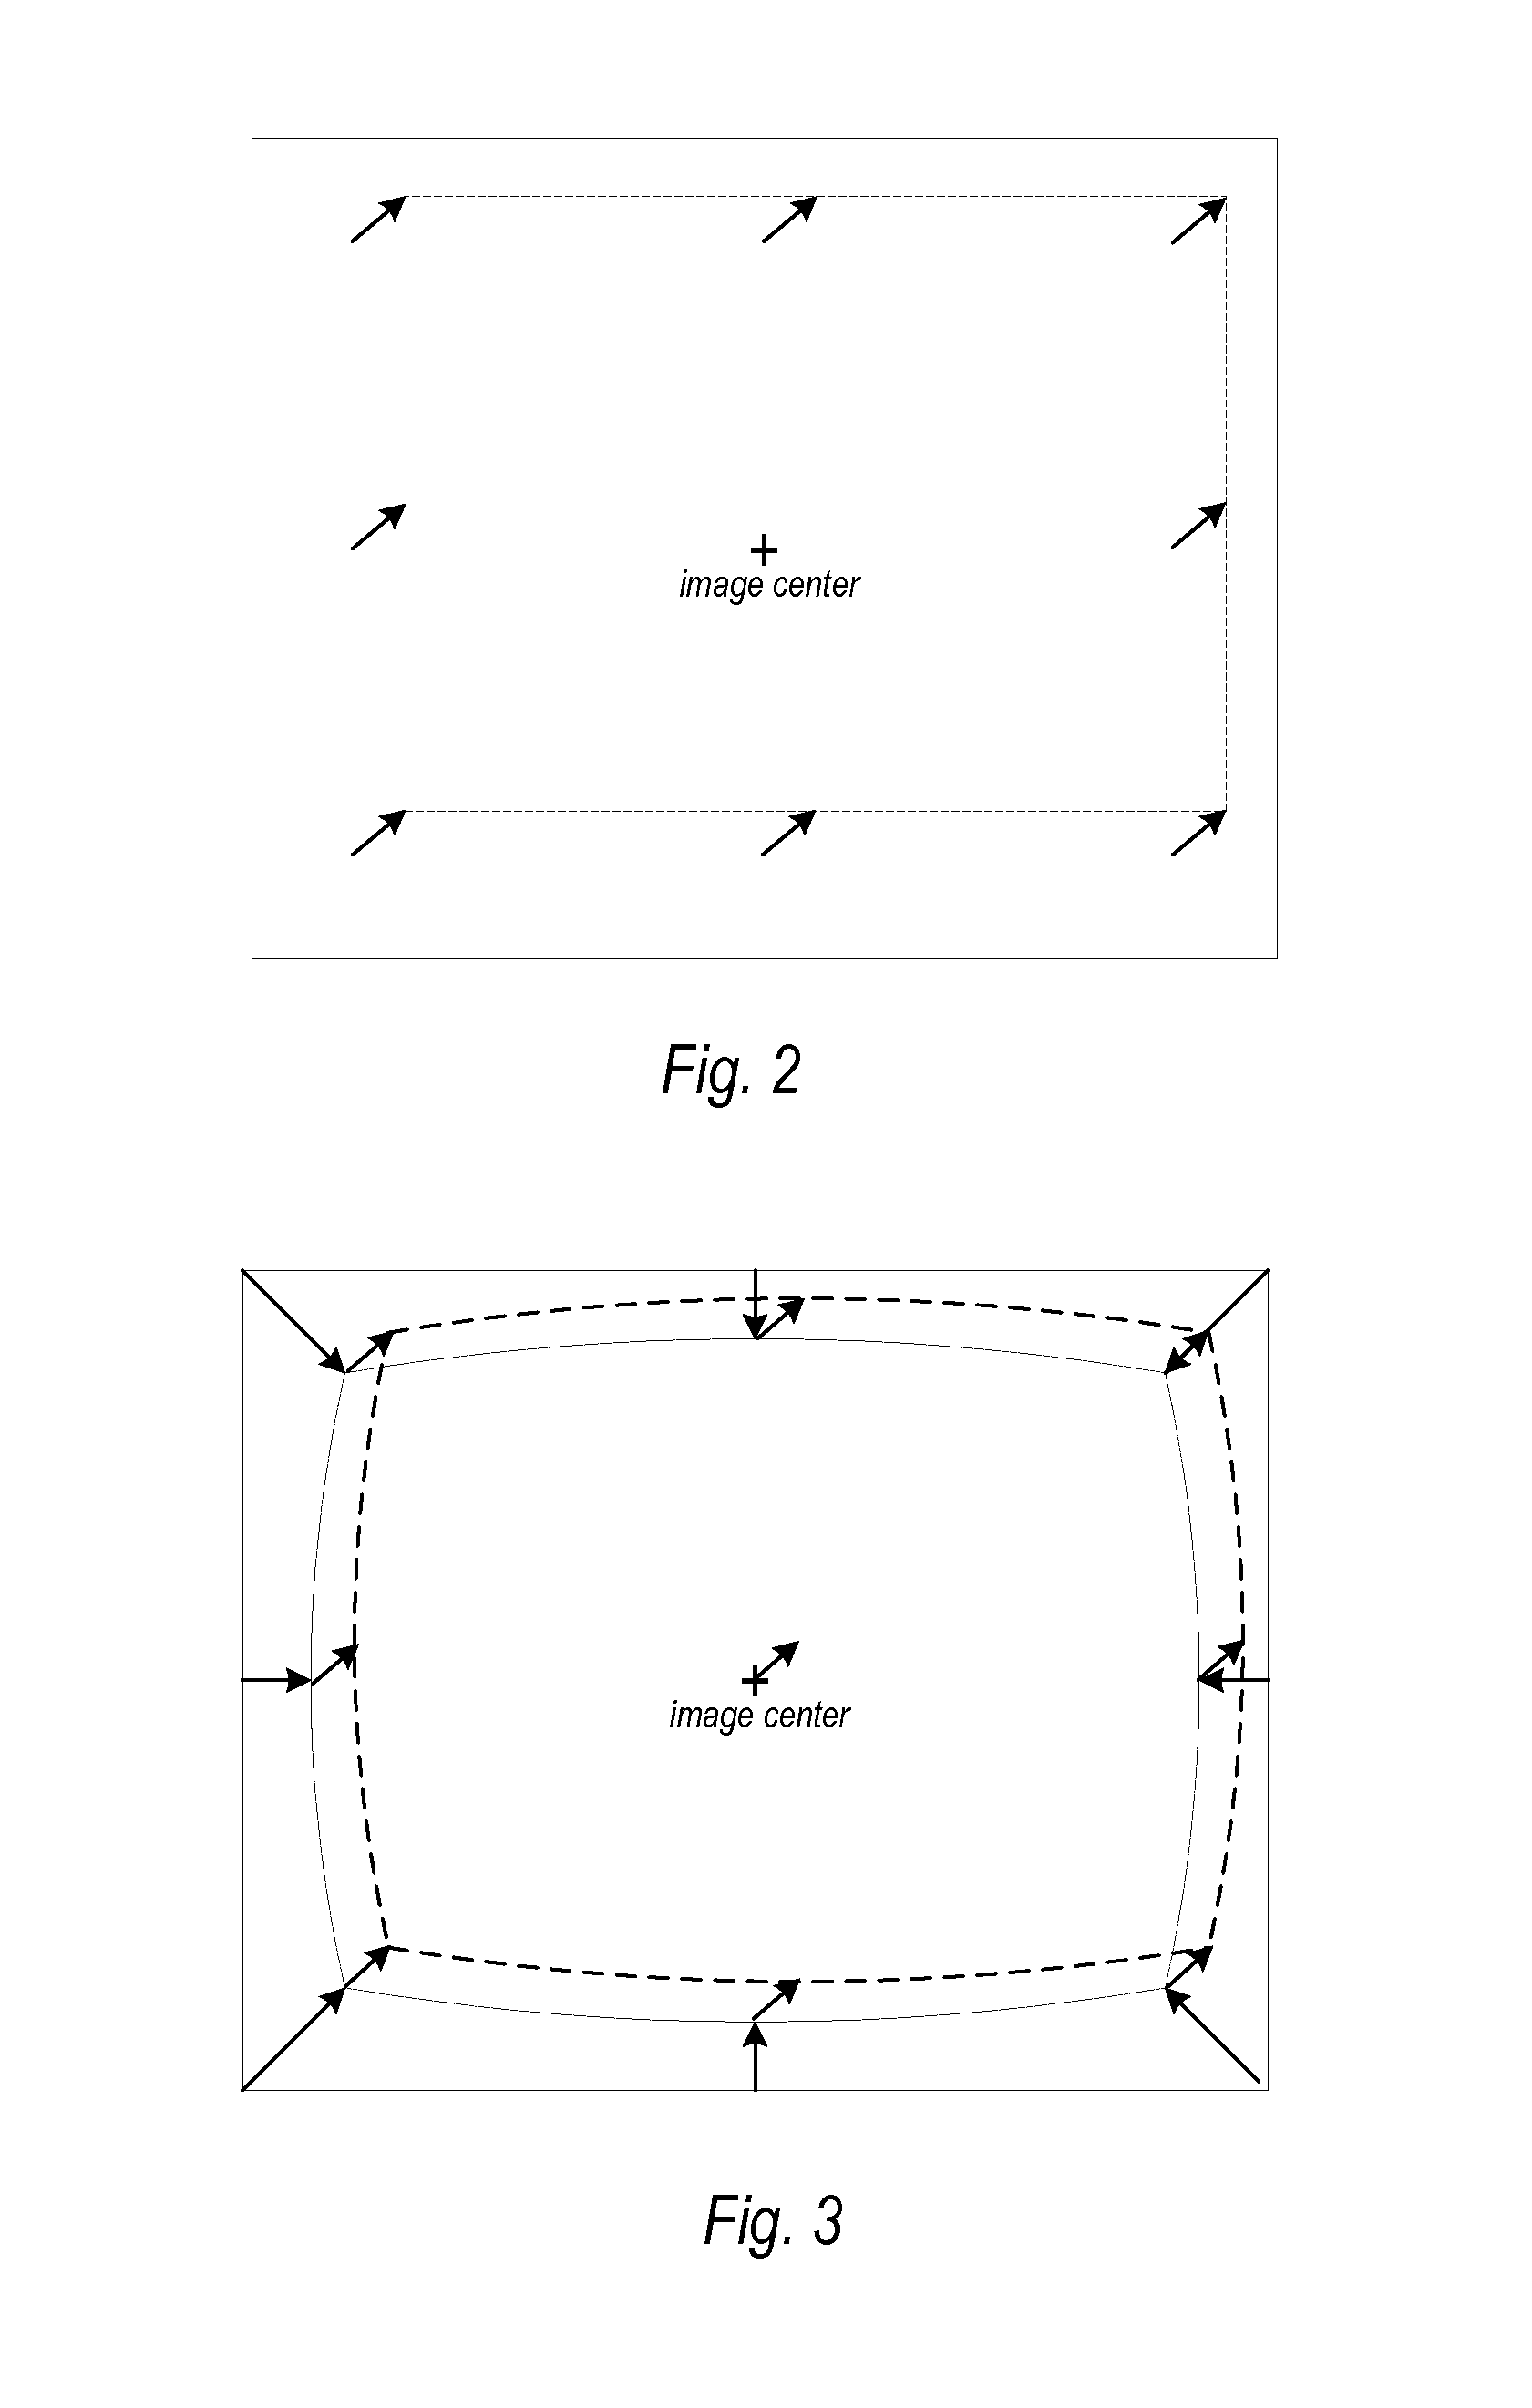 Methods and apparatus for camera calibration based on multiview image geometry